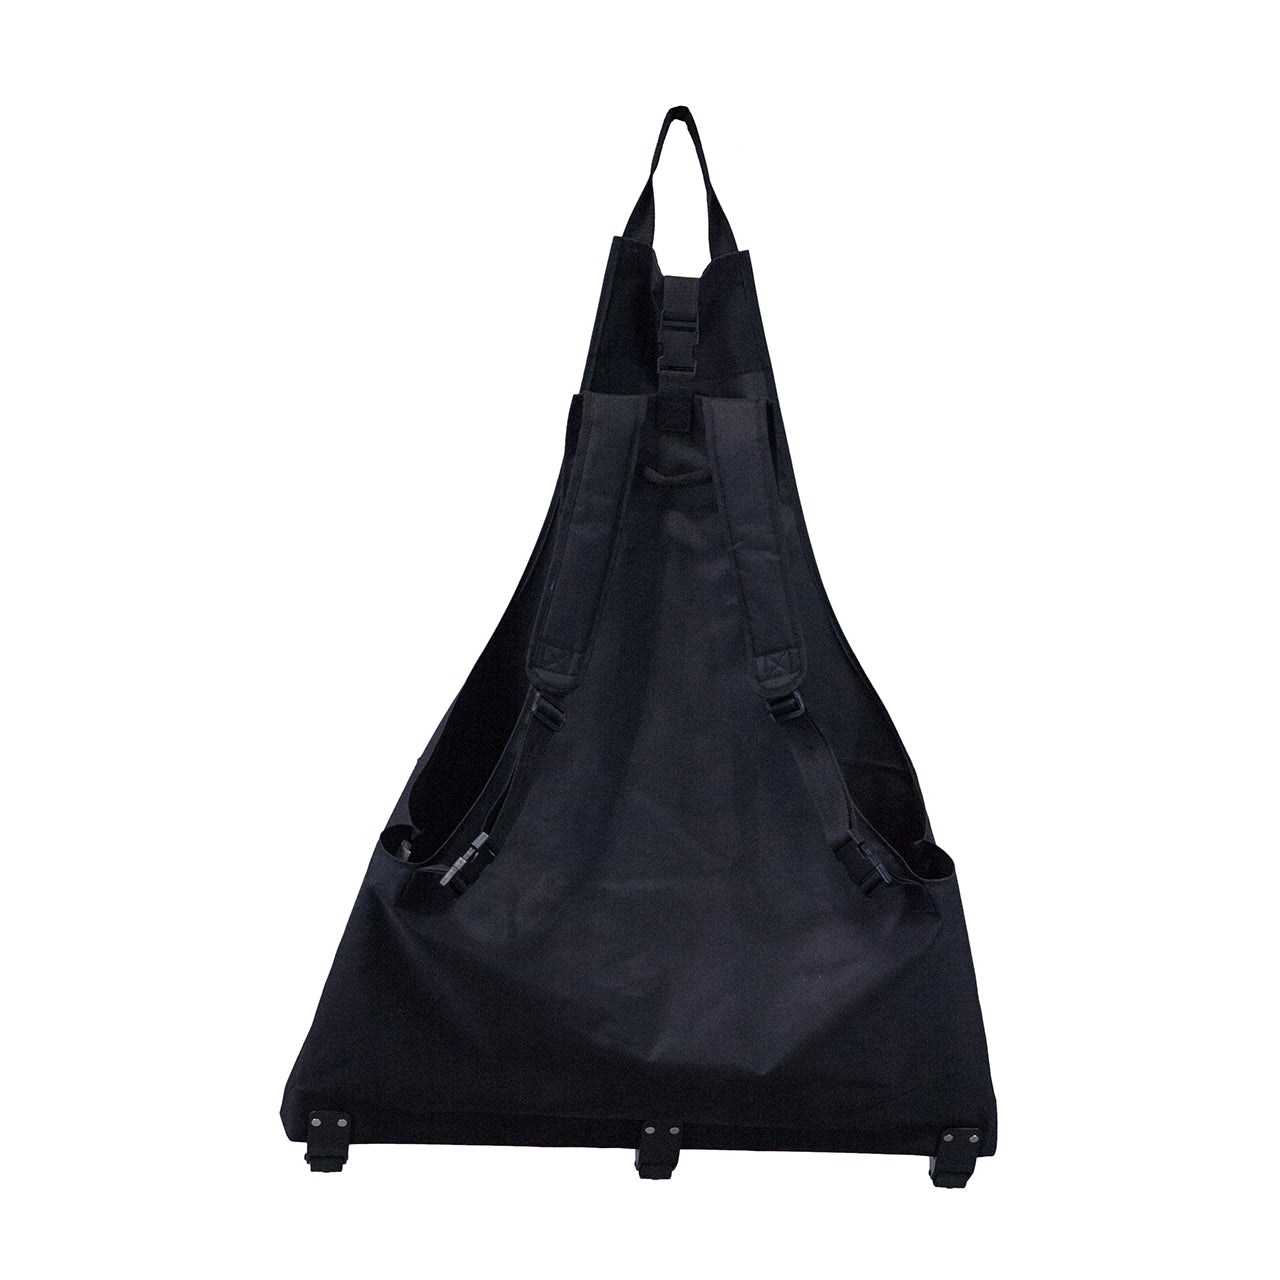 Rear view of the Bliss Hammocks Gravity Free Chair Carrying Backpack Bag.